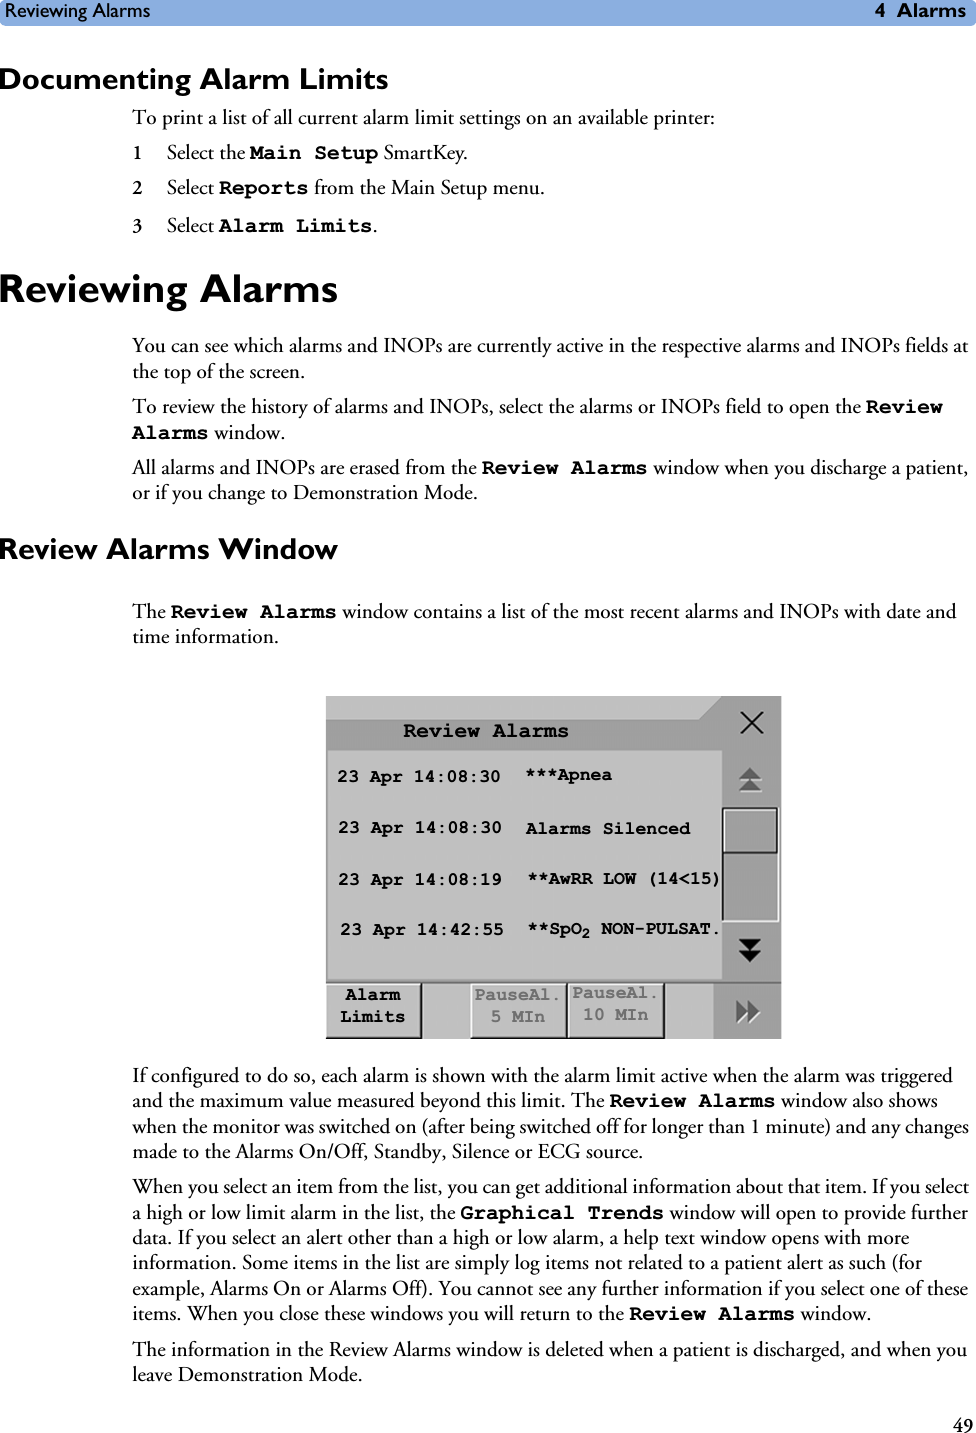 Reviewing Alarms 4Alarms49Documenting Alarm LimitsTo print a list of all current alarm limit settings on an available printer:1Select the Main Setup SmartKey.2Select Reports from the Main Setup menu.3Select Alarm Limits.Reviewing AlarmsYou can see which alarms and INOPs are currently active in the respective alarms and INOPs fields at the top of the screen.To review the history of alarms and INOPs, select the alarms or INOPs field to open the Review Alarms window.All alarms and INOPs are erased from the Review Alarms window when you discharge a patient, or if you change to Demonstration Mode.Review Alarms WindowThe Review Alarms window contains a list of the most recent alarms and INOPs with date and time information.If configured to do so, each alarm is shown with the alarm limit active when the alarm was triggered and the maximum value measured beyond this limit. The Review Alarms window also shows when the monitor was switched on (after being switched off for longer than 1 minute) and any changes made to the Alarms On/Off, Standby, Silence or ECG source.When you select an item from the list, you can get additional information about that item. If you select a high or low limit alarm in the list, the Graphical Trends window will open to provide further data. If you select an alert other than a high or low alarm, a help text window opens with more information. Some items in the list are simply log items not related to a patient alert as such (for example, Alarms On or Alarms Off). You cannot see any further information if you select one of these items. When you close these windows you will return to the Review Alarms window.The information in the Review Alarms window is deleted when a patient is discharged, and when you leave Demonstration Mode. Review Alarms23 Apr 14:08:30 ***Apnea23 Apr 14:08:30 Alarms Silenced23 Apr 14:08:19 **AwRR LOW (14&lt;15)23 Apr 14:42:55 **SpO2 NON-PULSAT.Alarm LimitsPauseAl. 5 MInPauseAl. 10 MIn